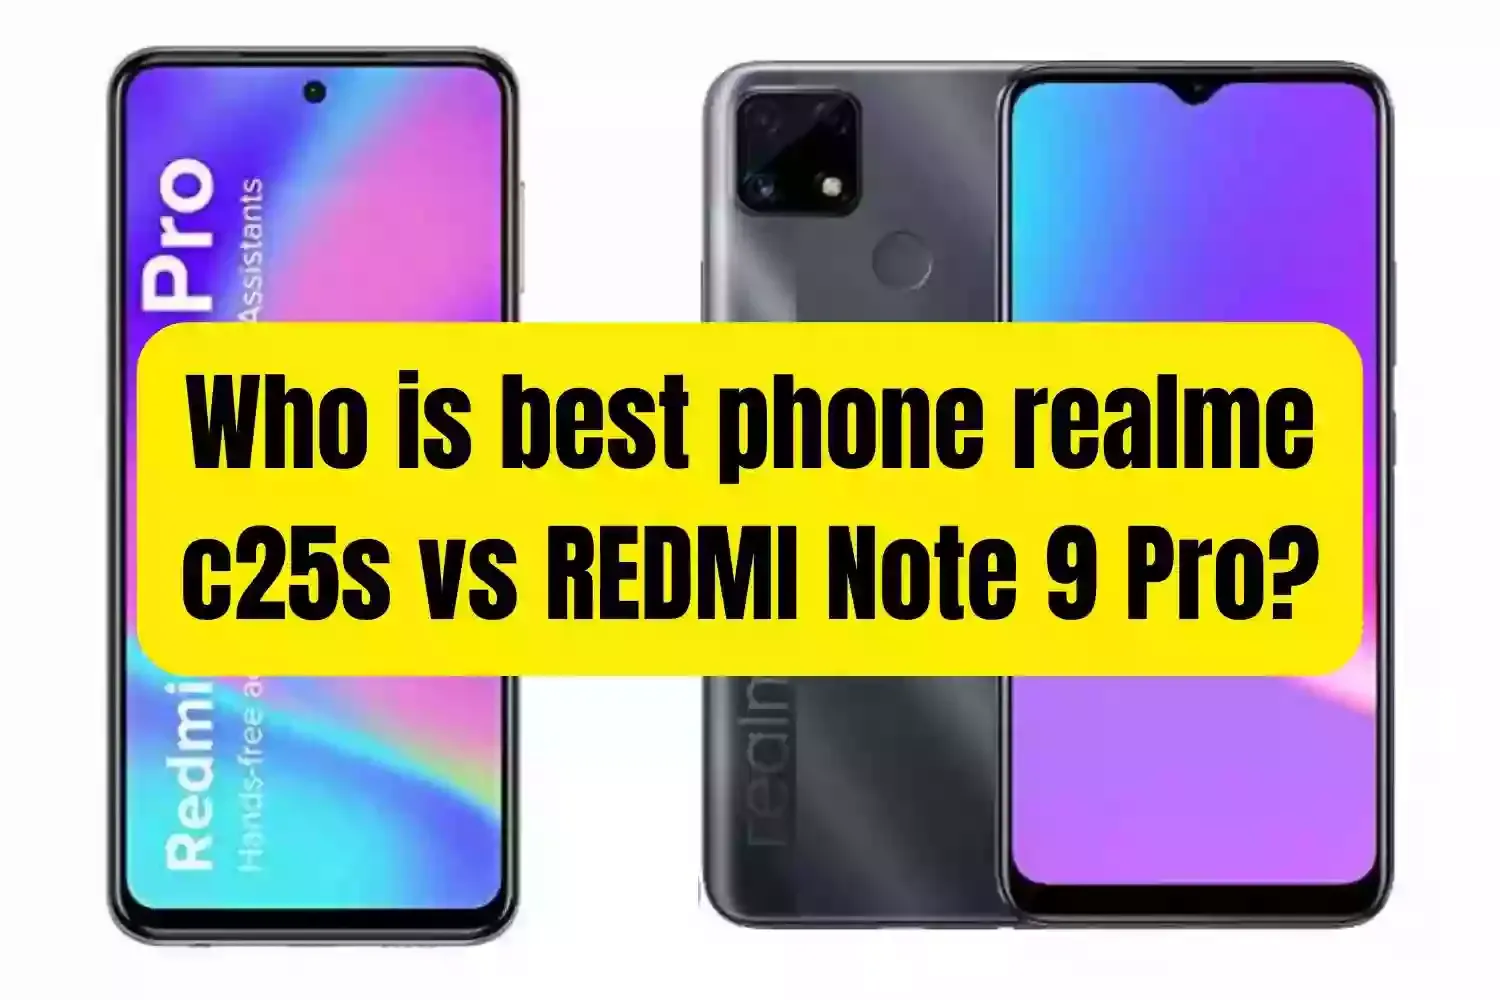 Who is best phone realme c25s vs REDMI Note 9 Pro?